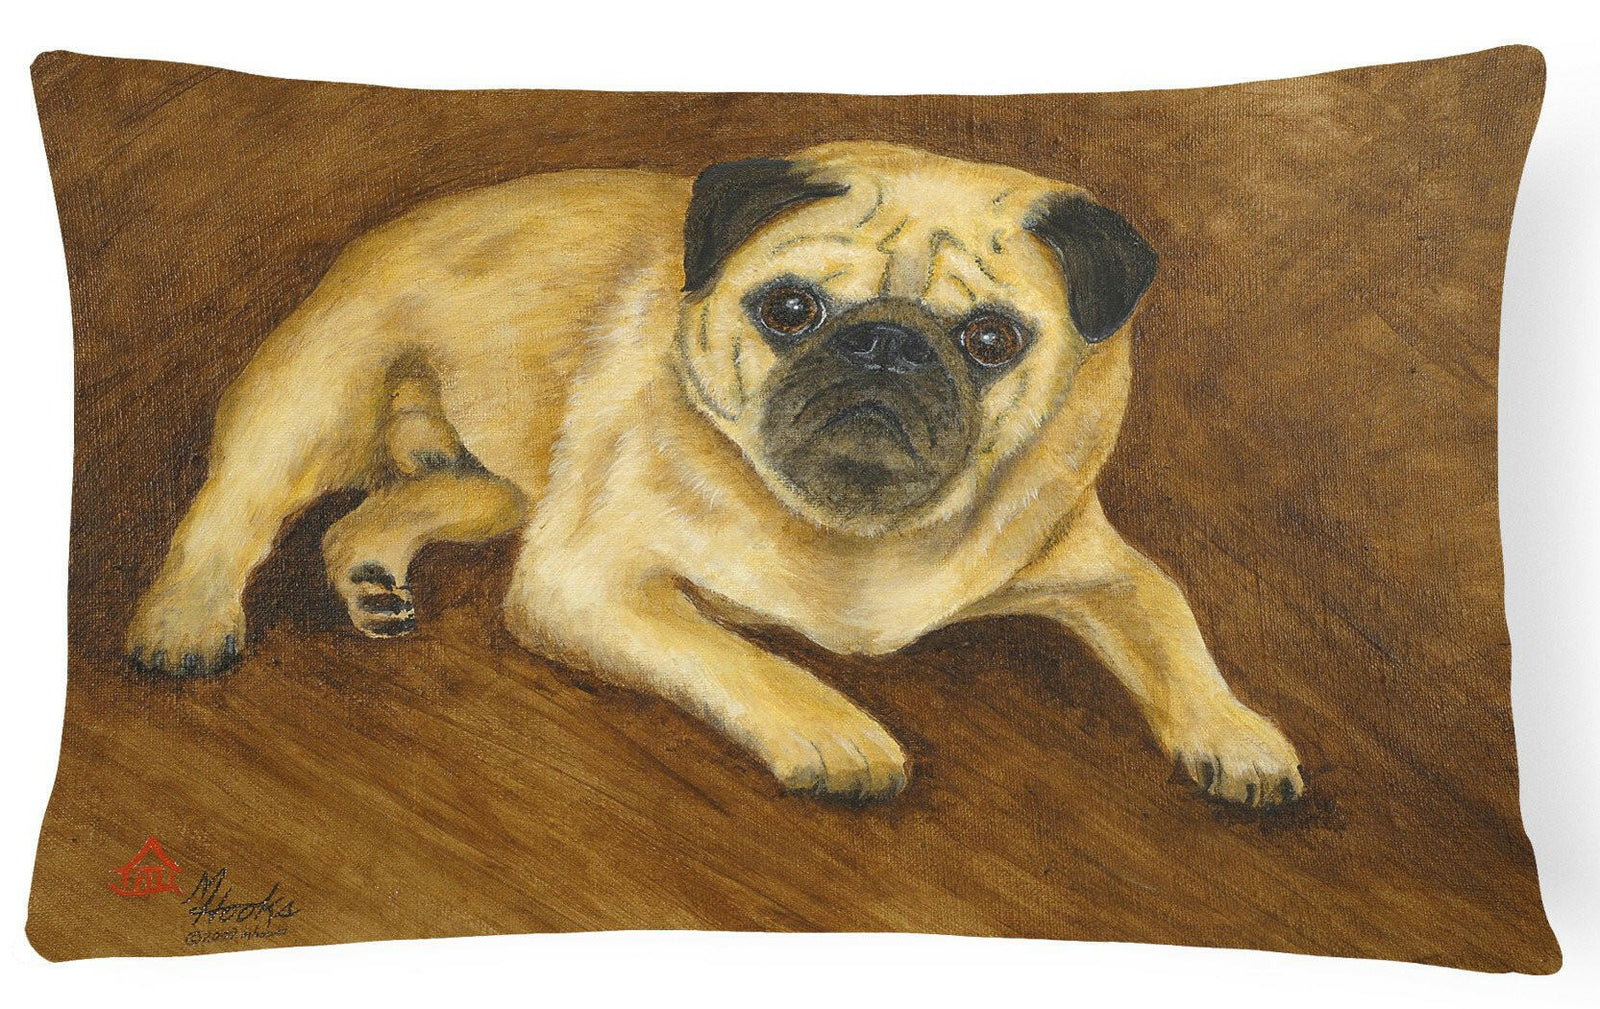 Fawn Pug Roscoe Fabric Decorative Pillow MH1062PW1216 by Caroline's Treasures